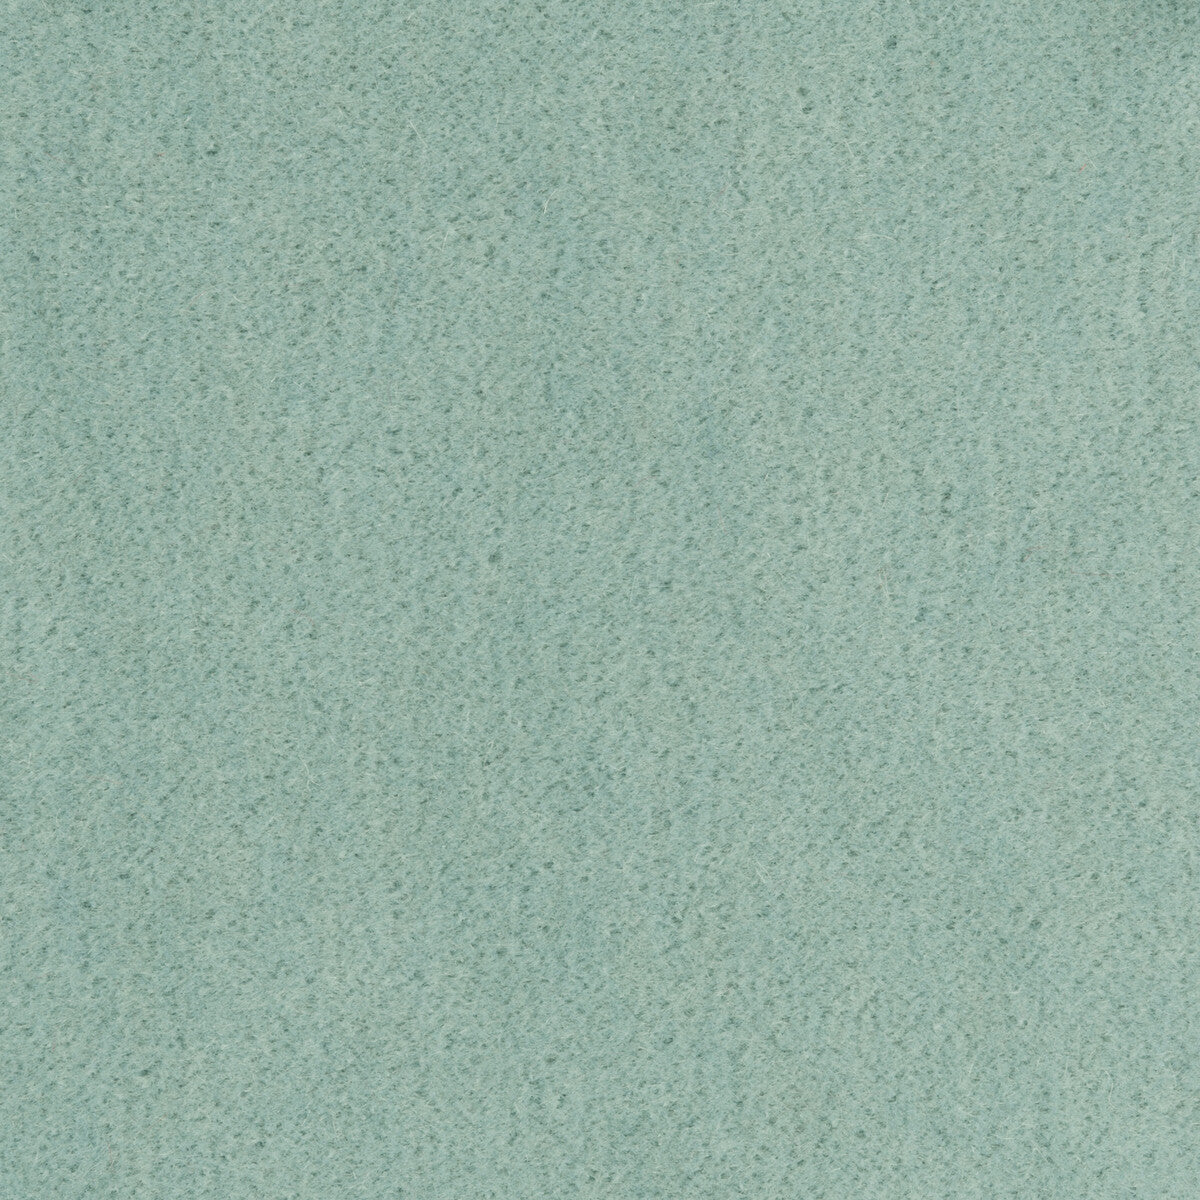 Bachelor Mohair fabric in aqua color - pattern 8014101.15.0 - by Brunschwig &amp; Fils